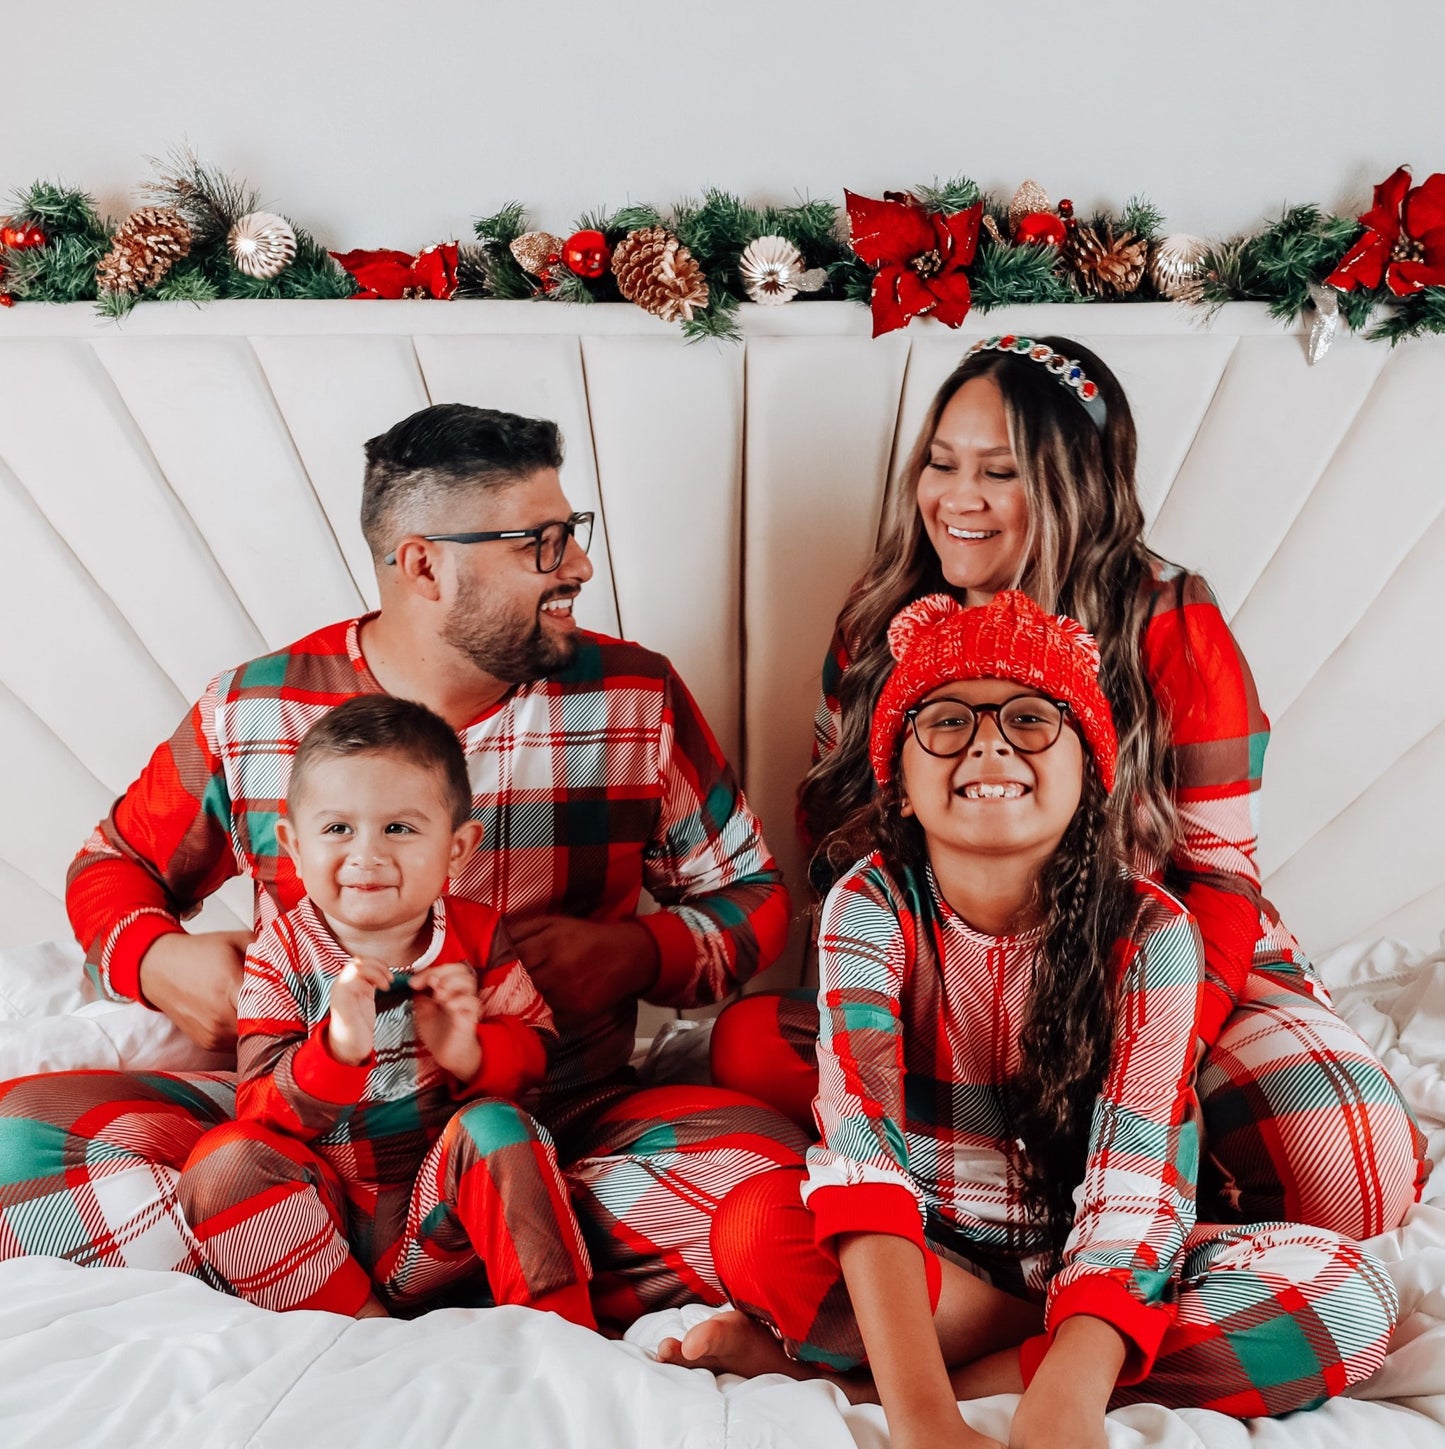 Red Holiday Family Pajamas - LITTLE MIA BELLA